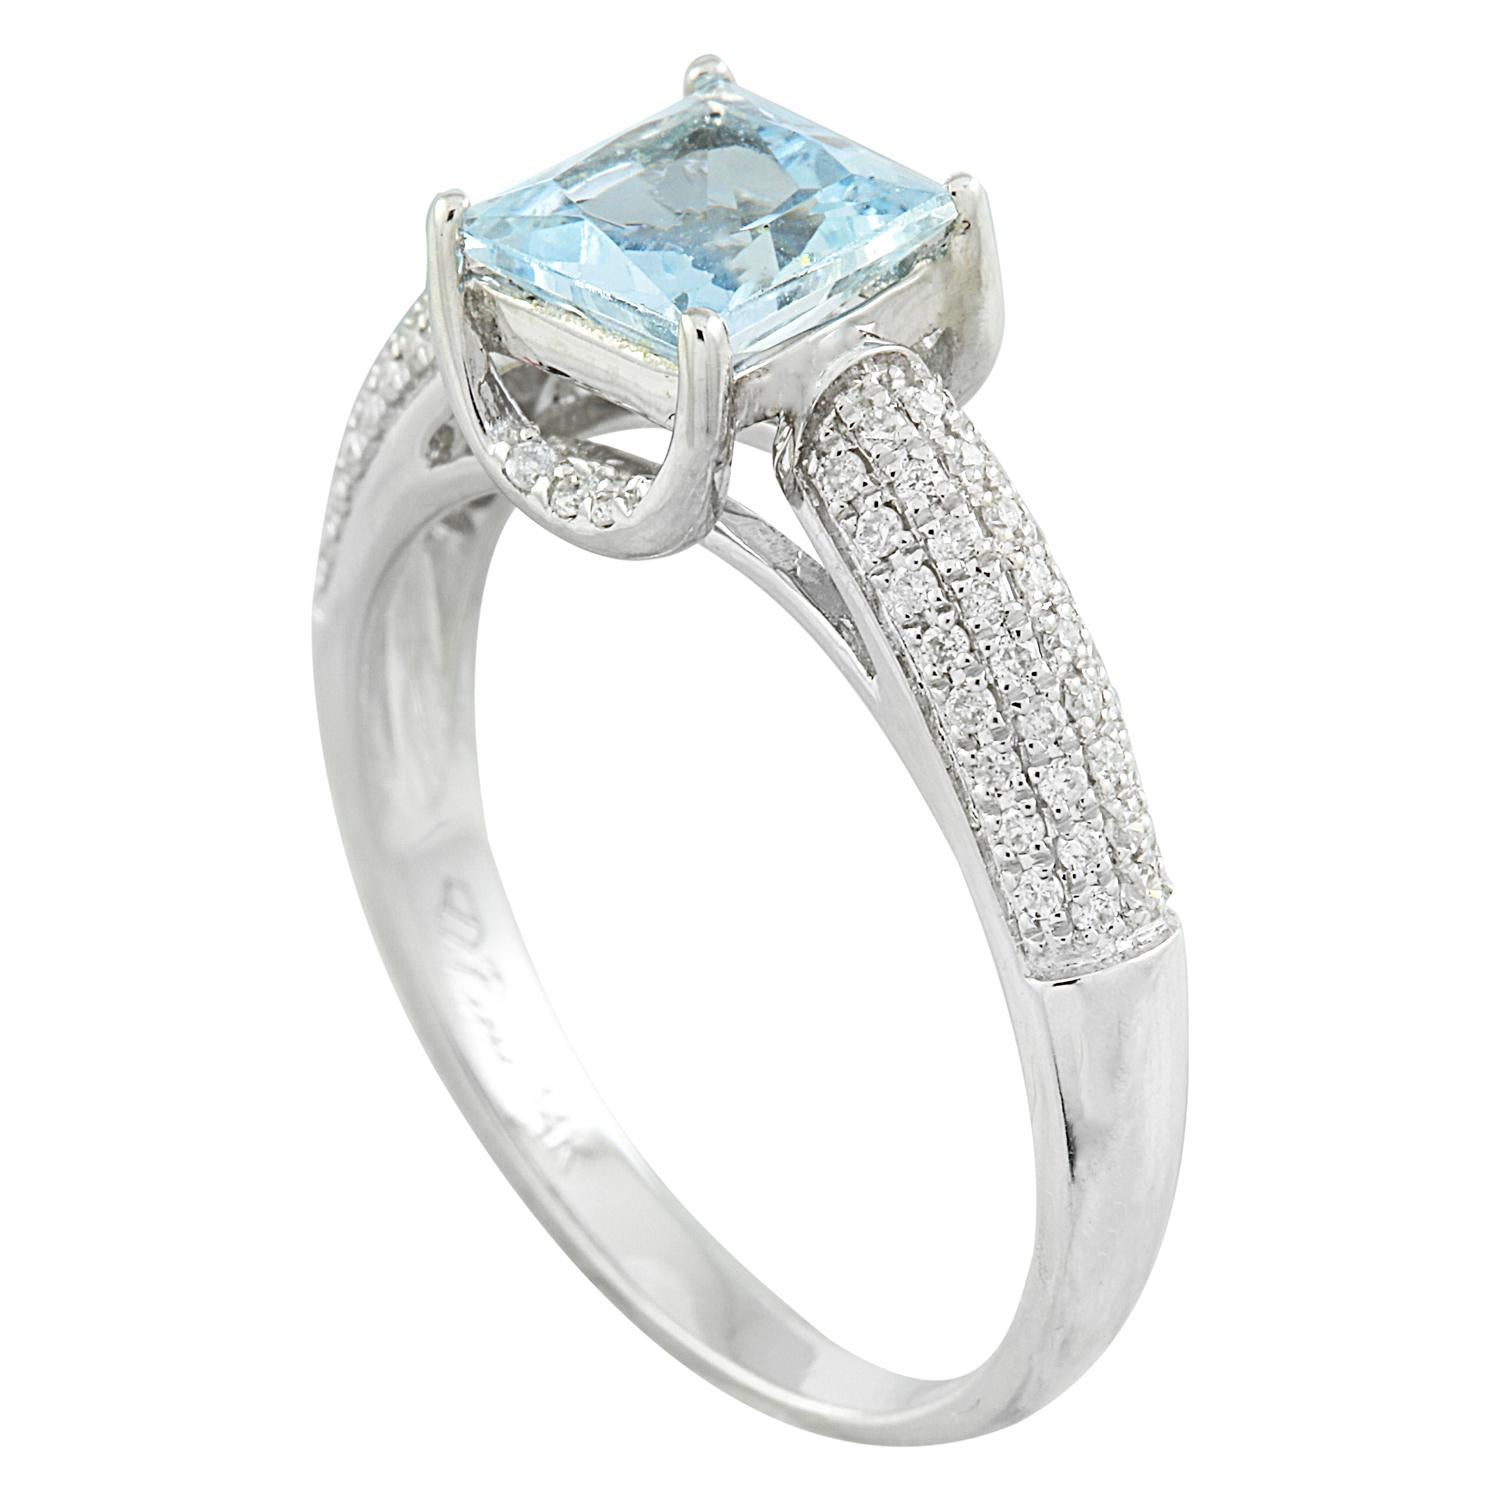 Modern Natural Aquamarine Diamond Ring: Exquisite Beauty in 14K Solid White Gold For Sale